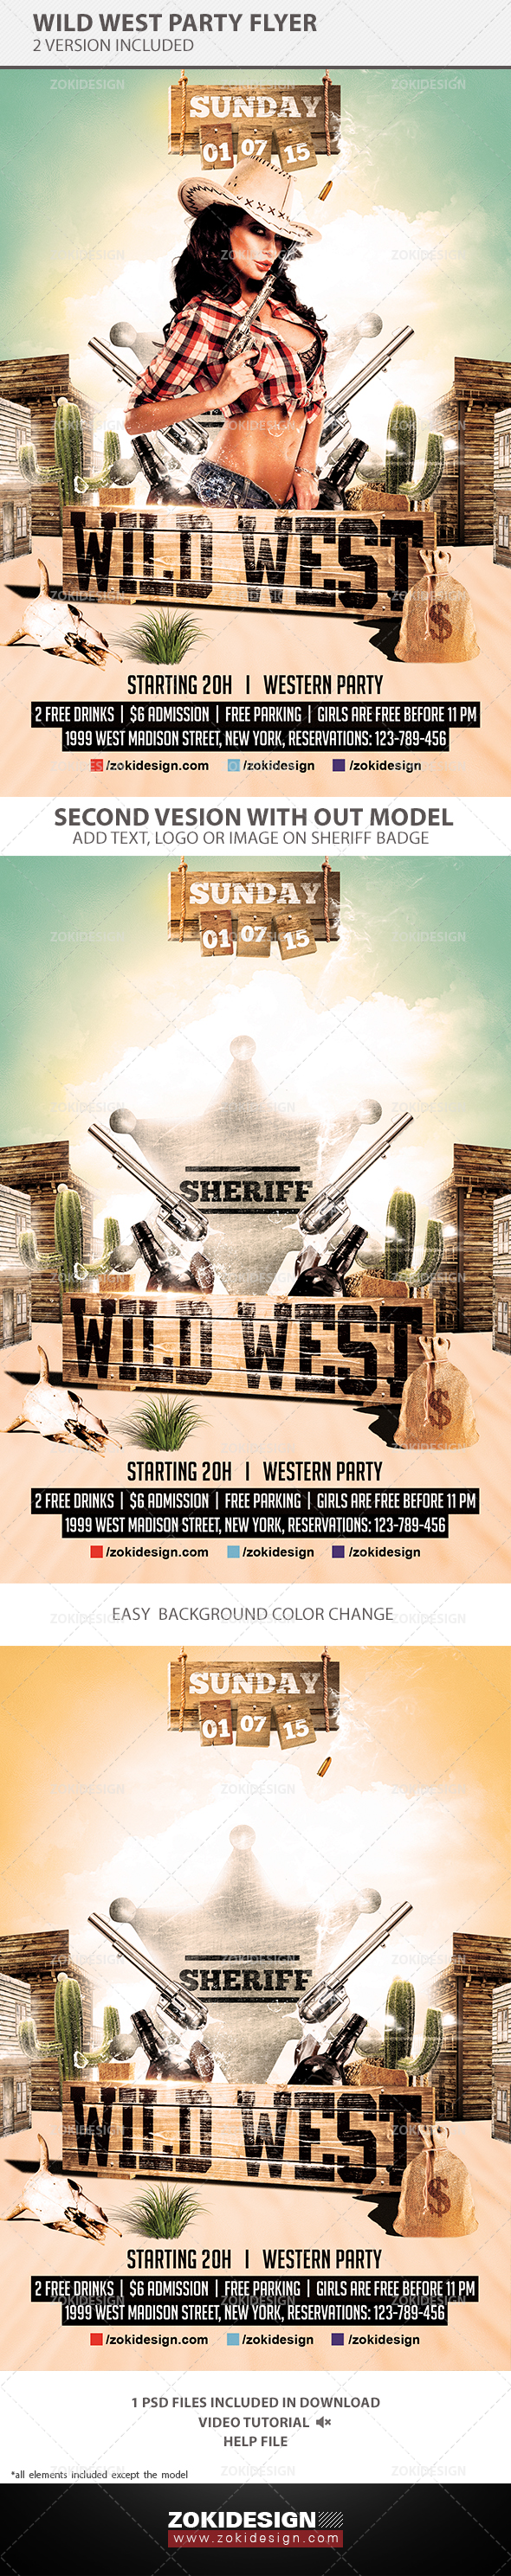 bar cactus club country cowboy cowgirl creative desert Event flyer girls guns hat Lone Ranger mexican party